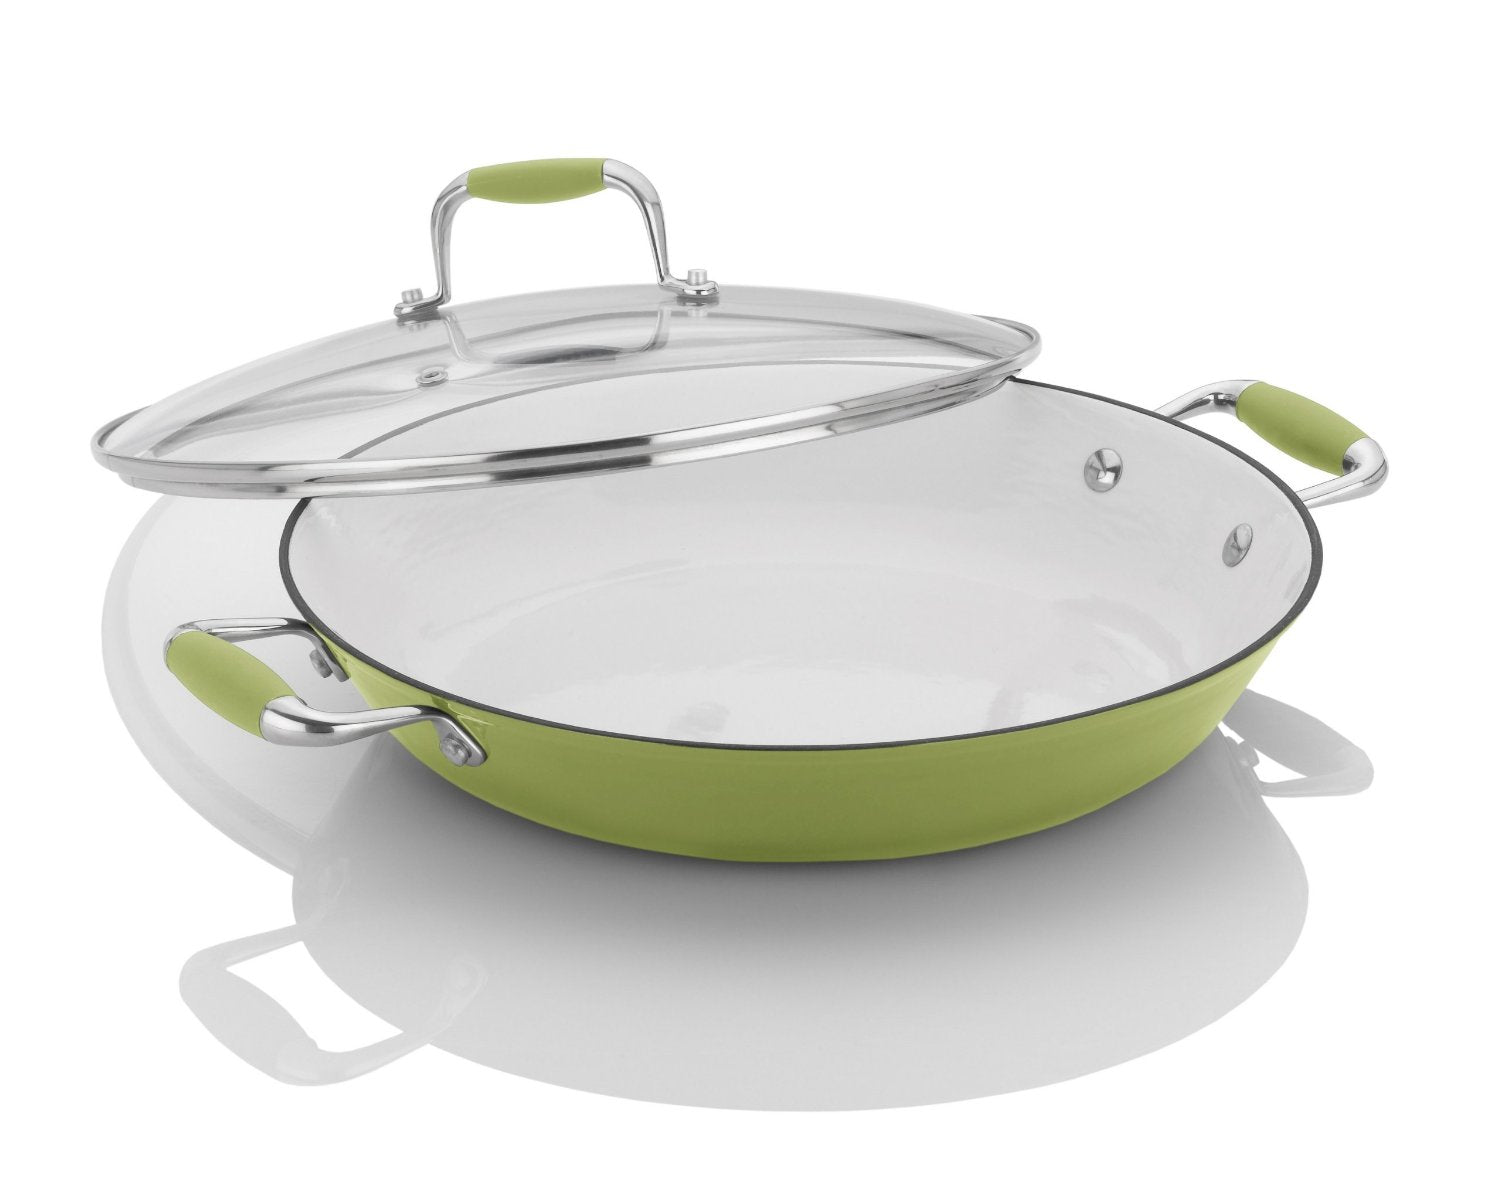 Michelle B. by Fagor Cast Iron Lite Chef's Pan with Lid, Lemon Lime, 12"